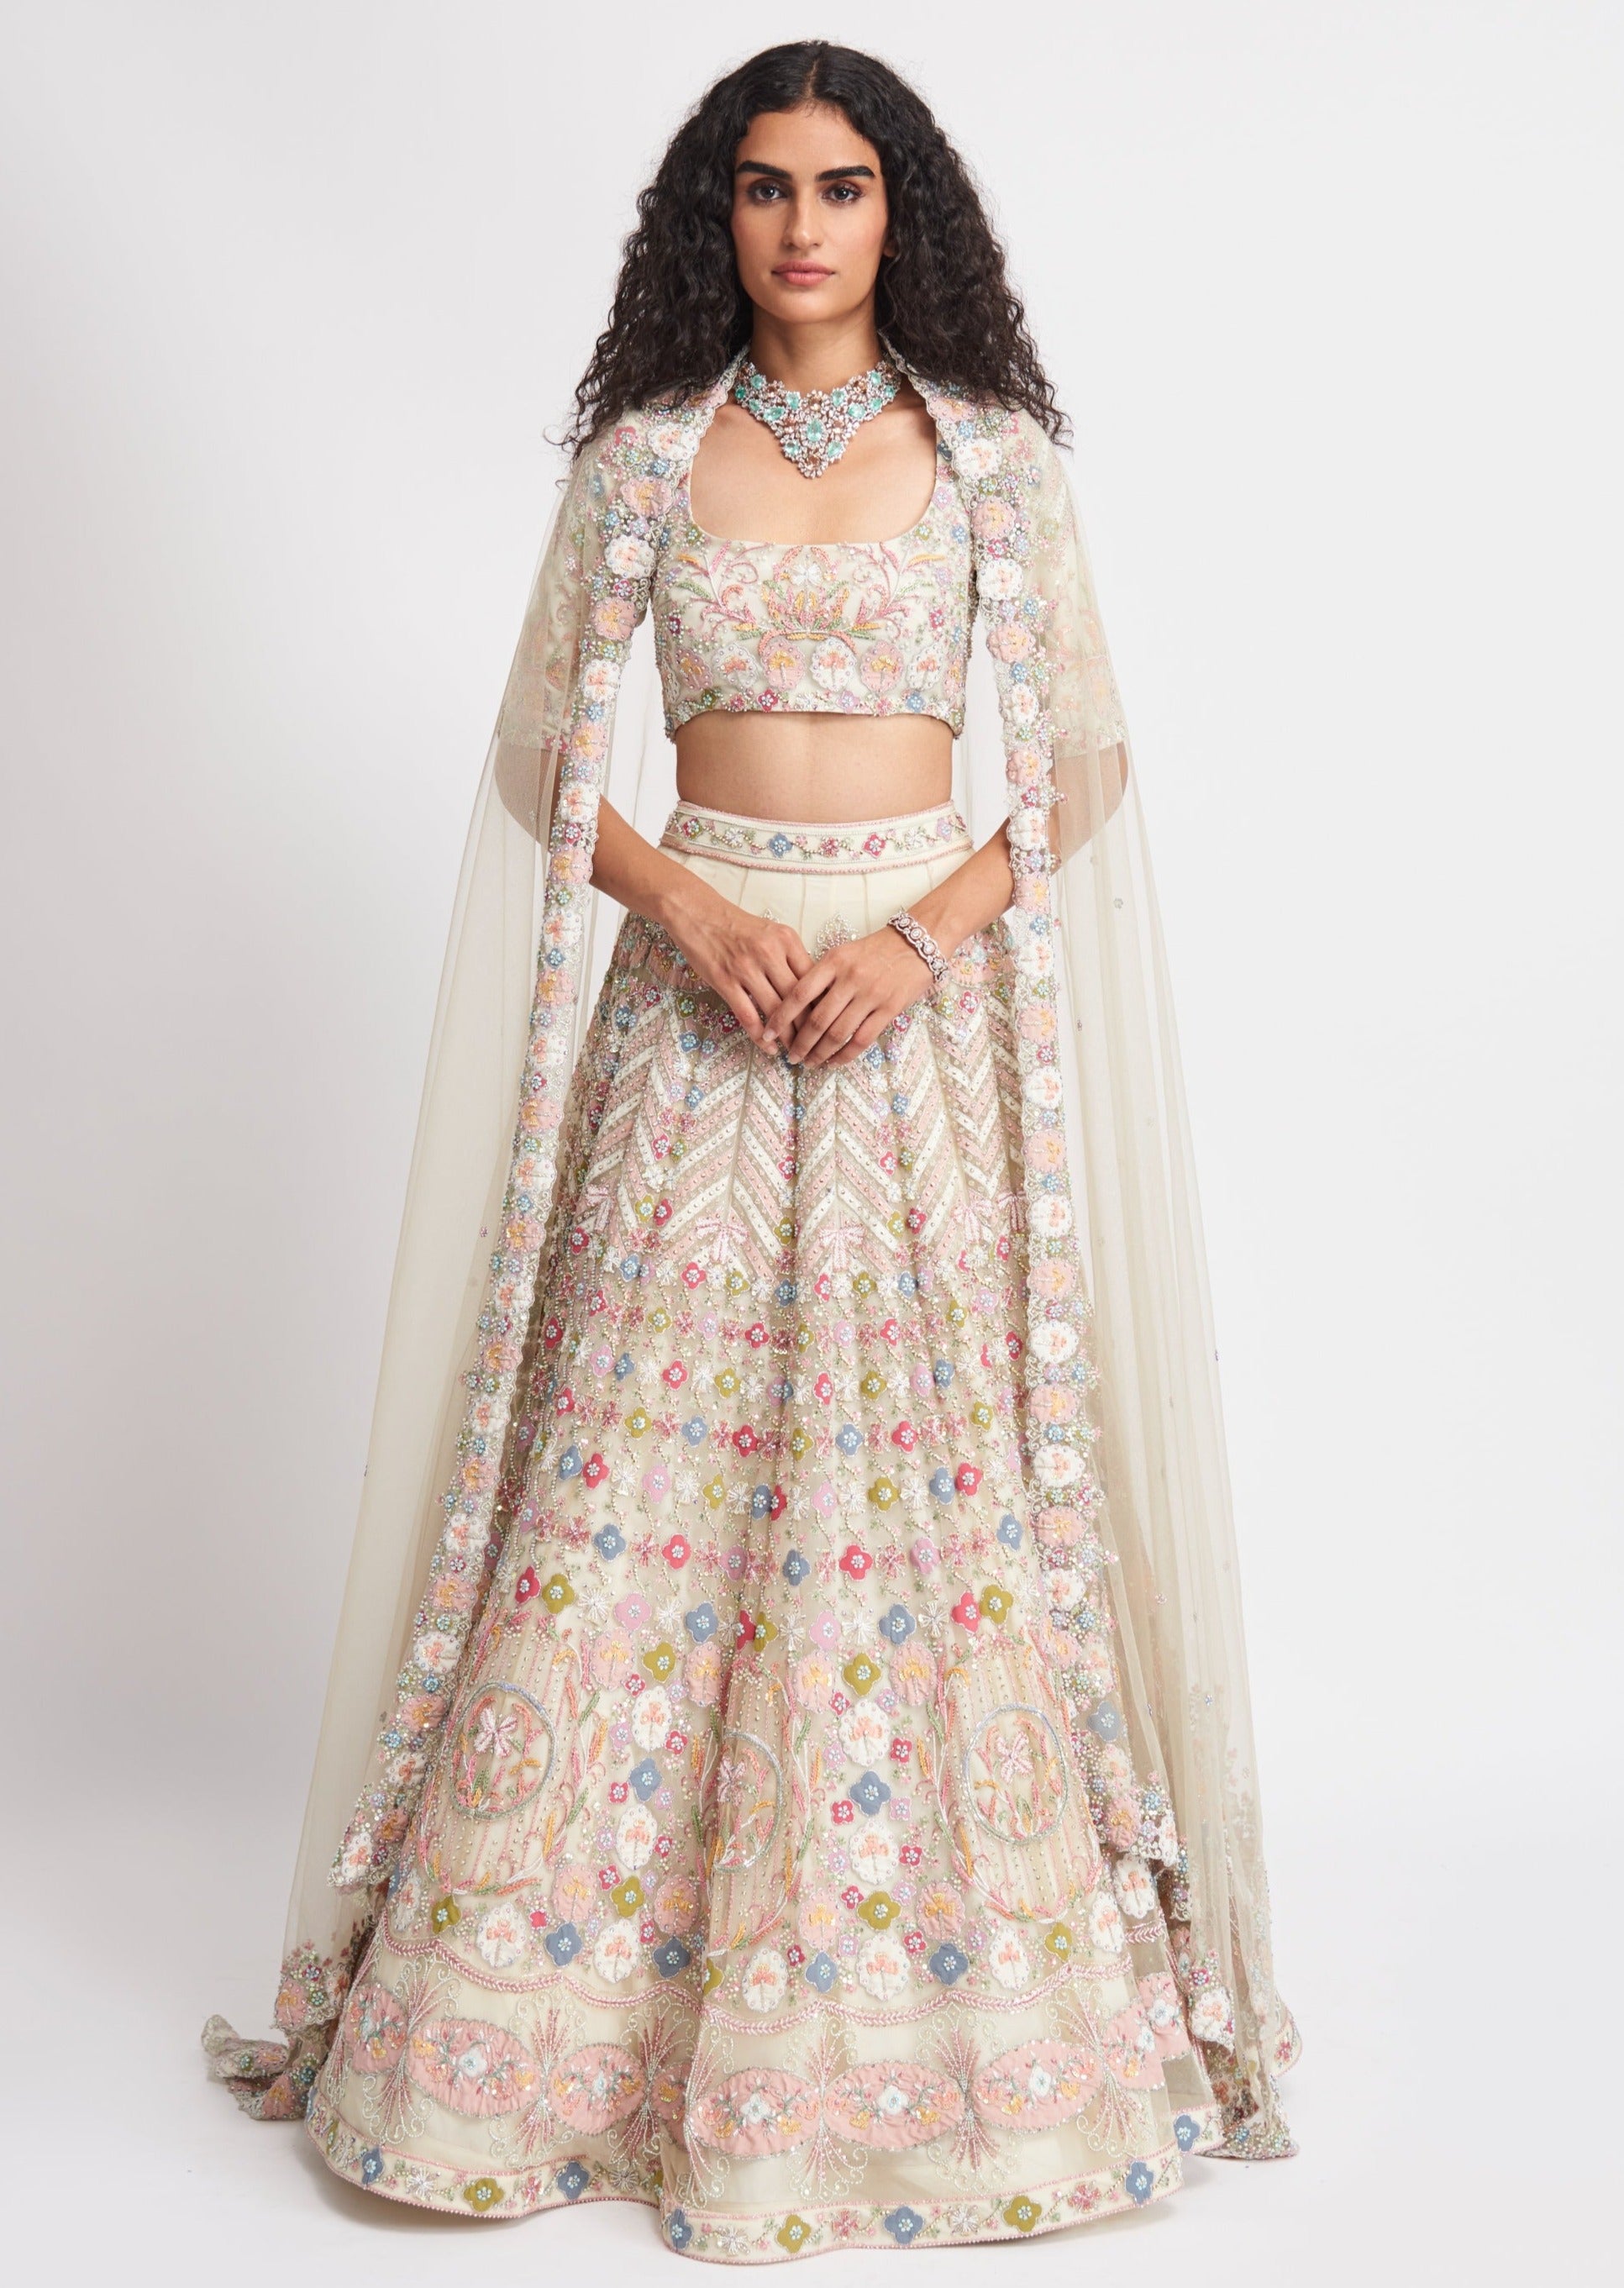 Lehenga Choli With Jacket and Accessories Matched - Etsy